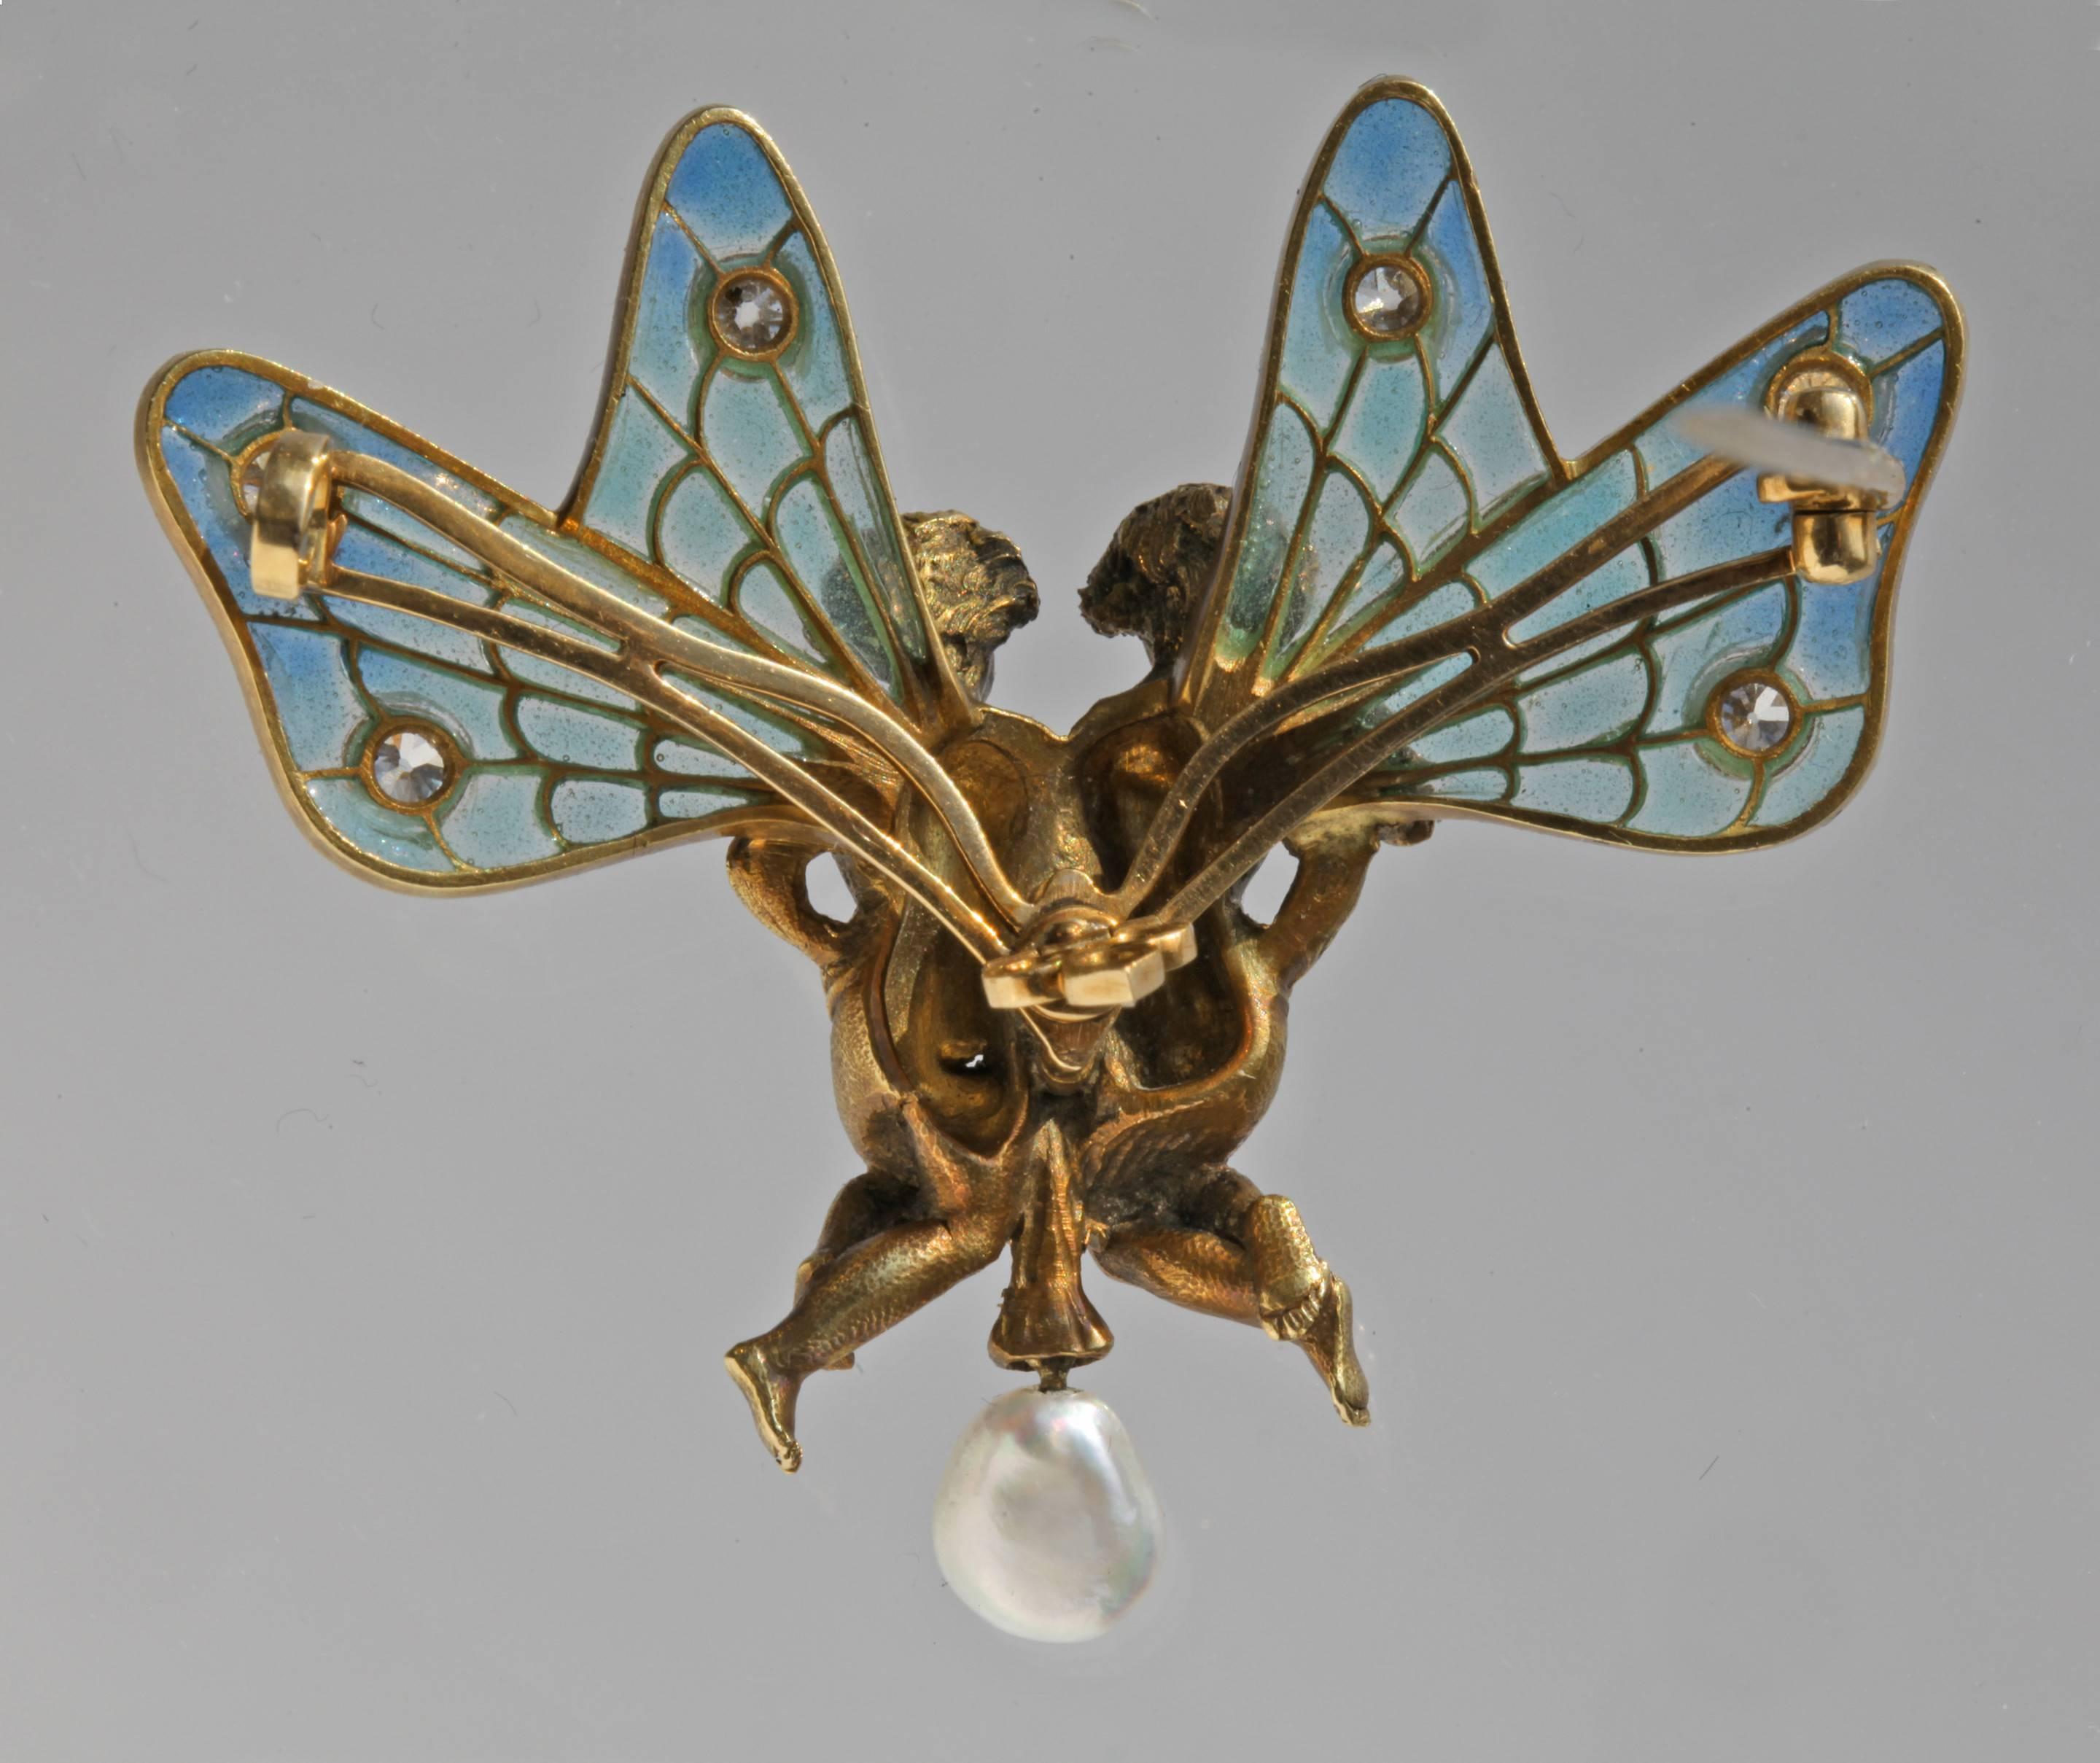 'The Bond of Love' The workmanship of this Twin Fairy brooch is of the highest quality in the manner of Lalique.
Marks: Plisson & Hartz maker's mark & eagle's head
Illustrated in our book: Beatriz Chadour-Sampson & Sonya Newell-Smith, Tadema Gallery